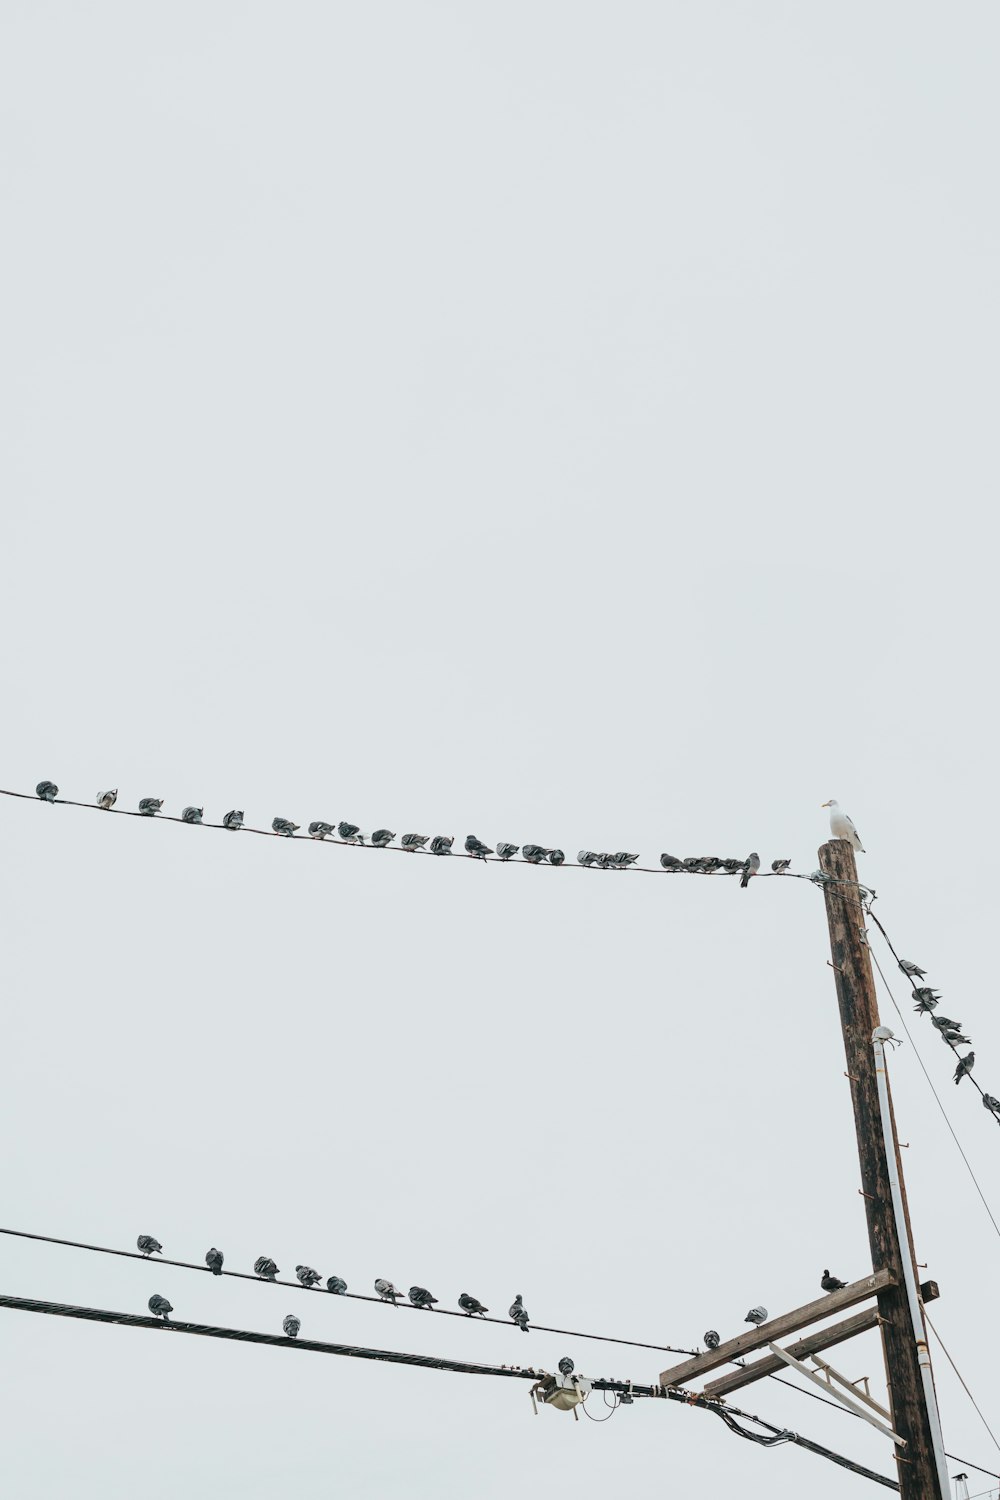 birds on cable wires